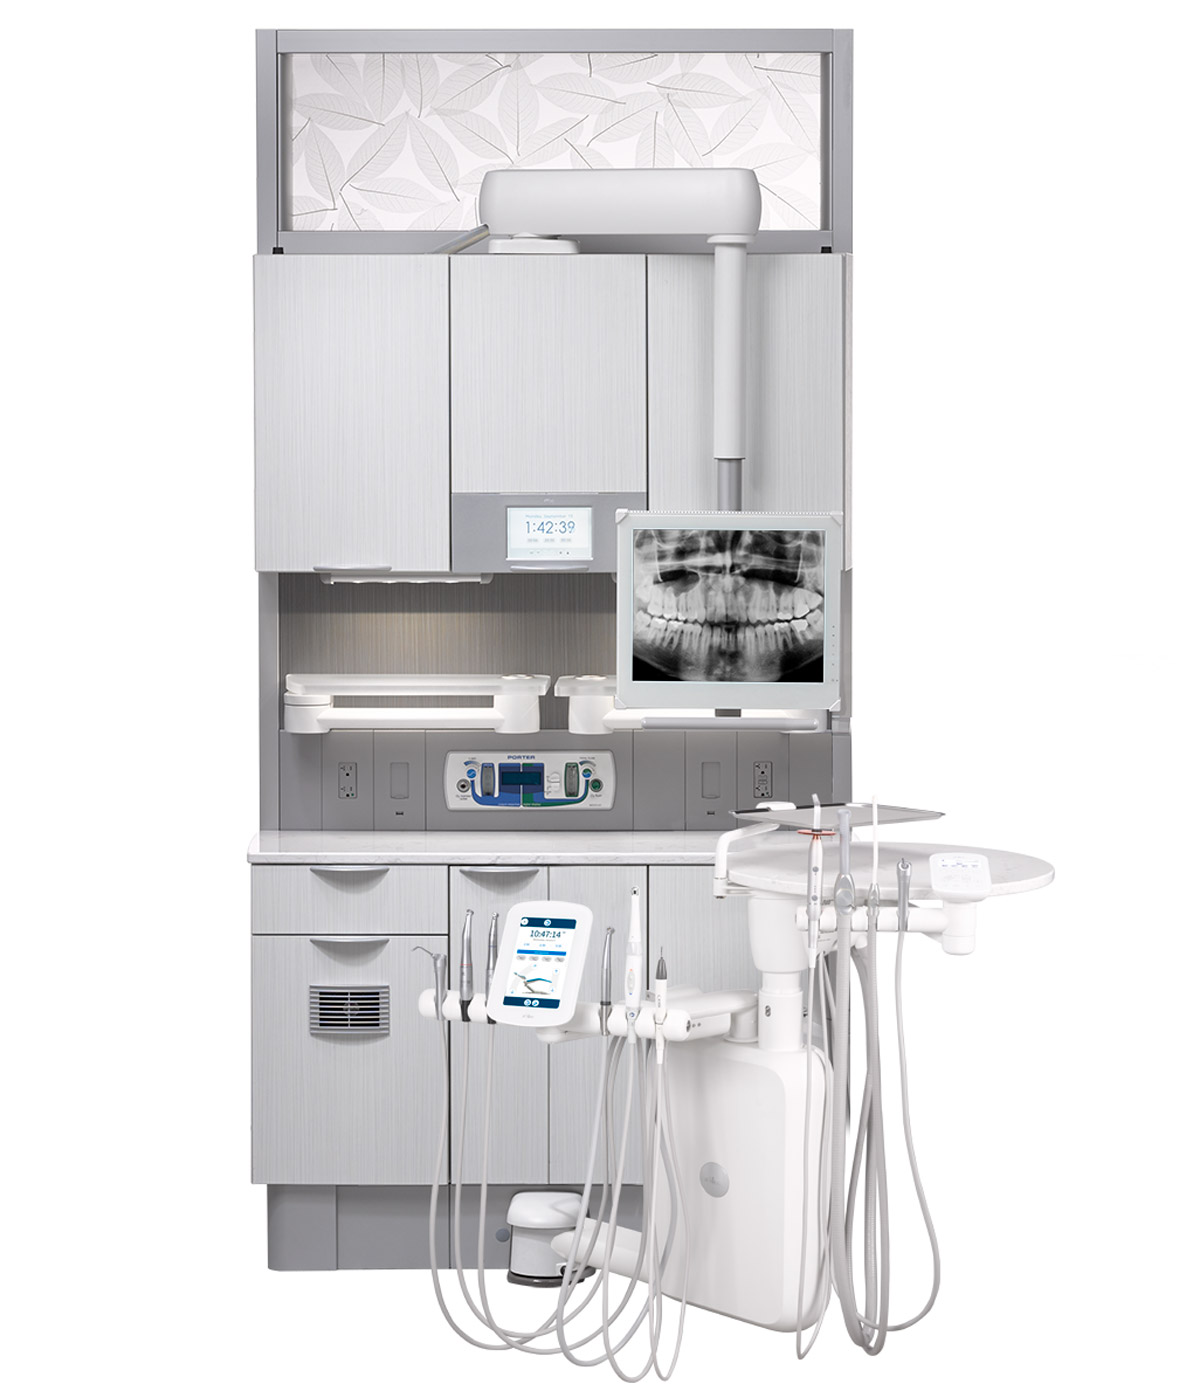 A-dec Inspire 591 treatment console with infills